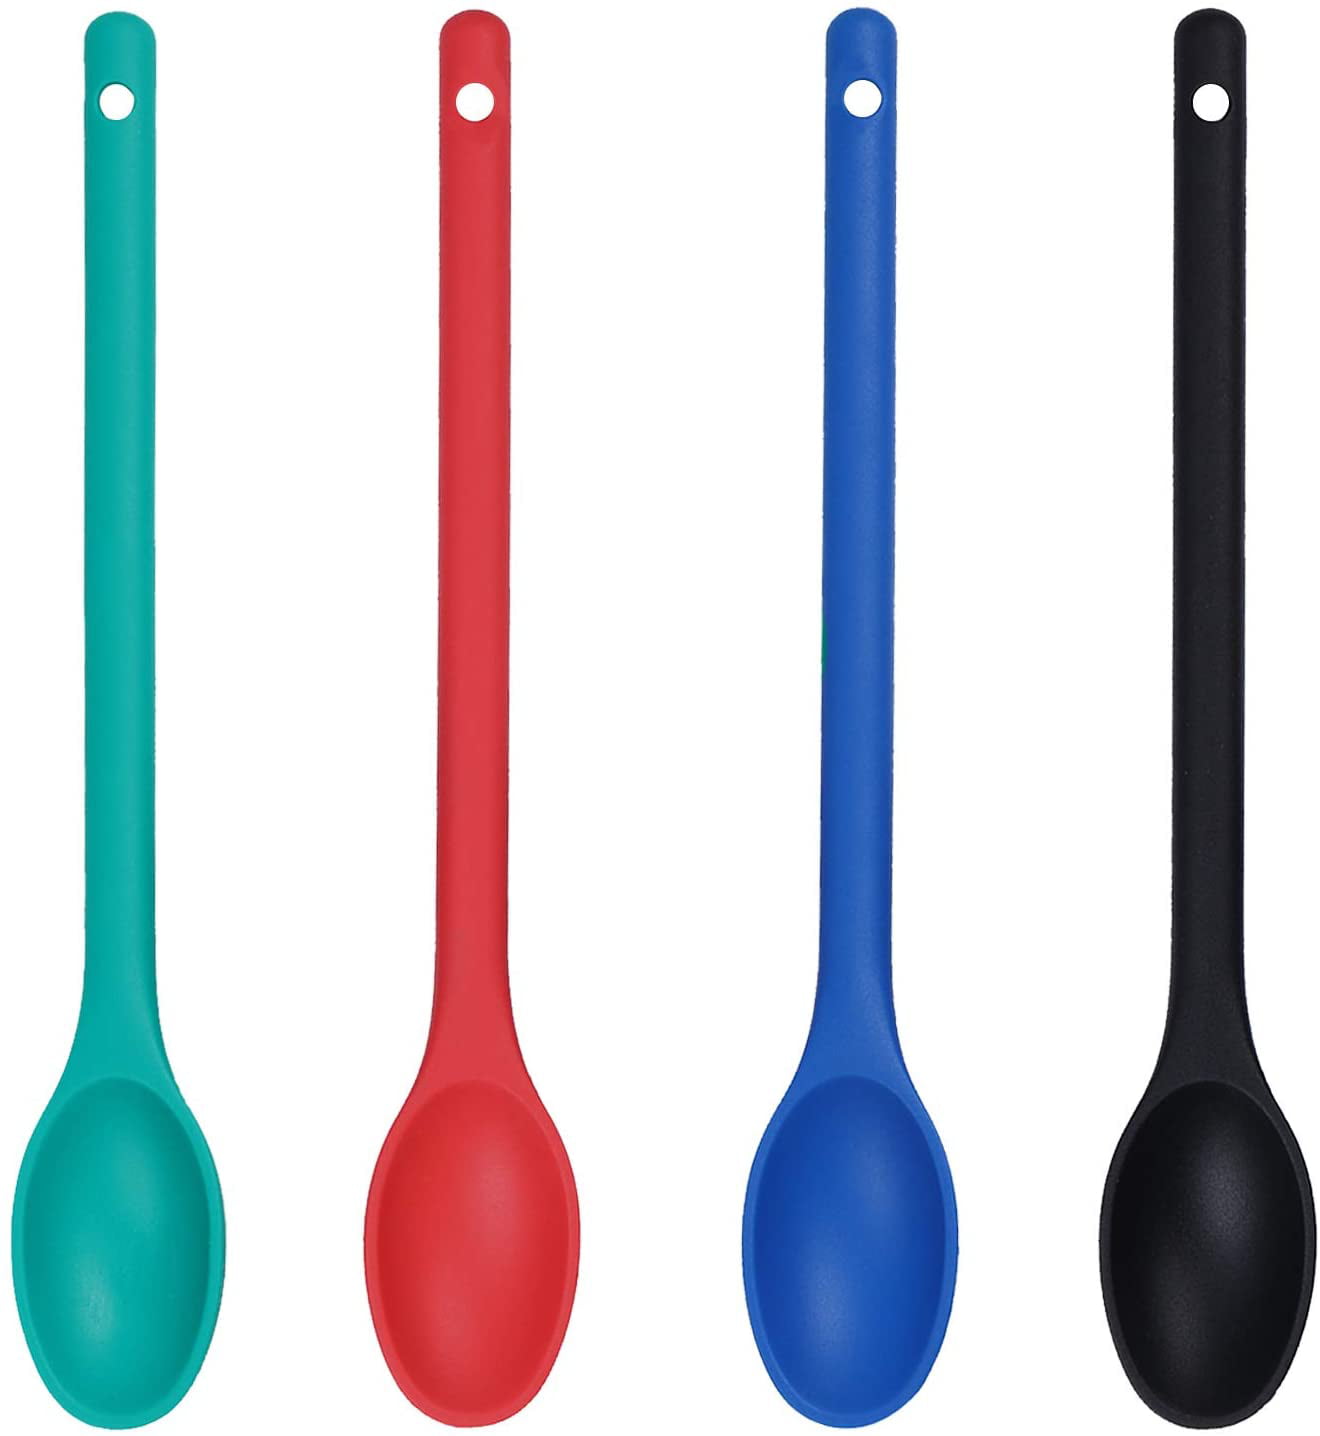 ASTER Silicone Mixing Spoon,2 Pieces Heat-Resistant Serving Spoons Cooking Spoons Silicone for Kitchen Cooking Baking Stirring Mixing Tools 